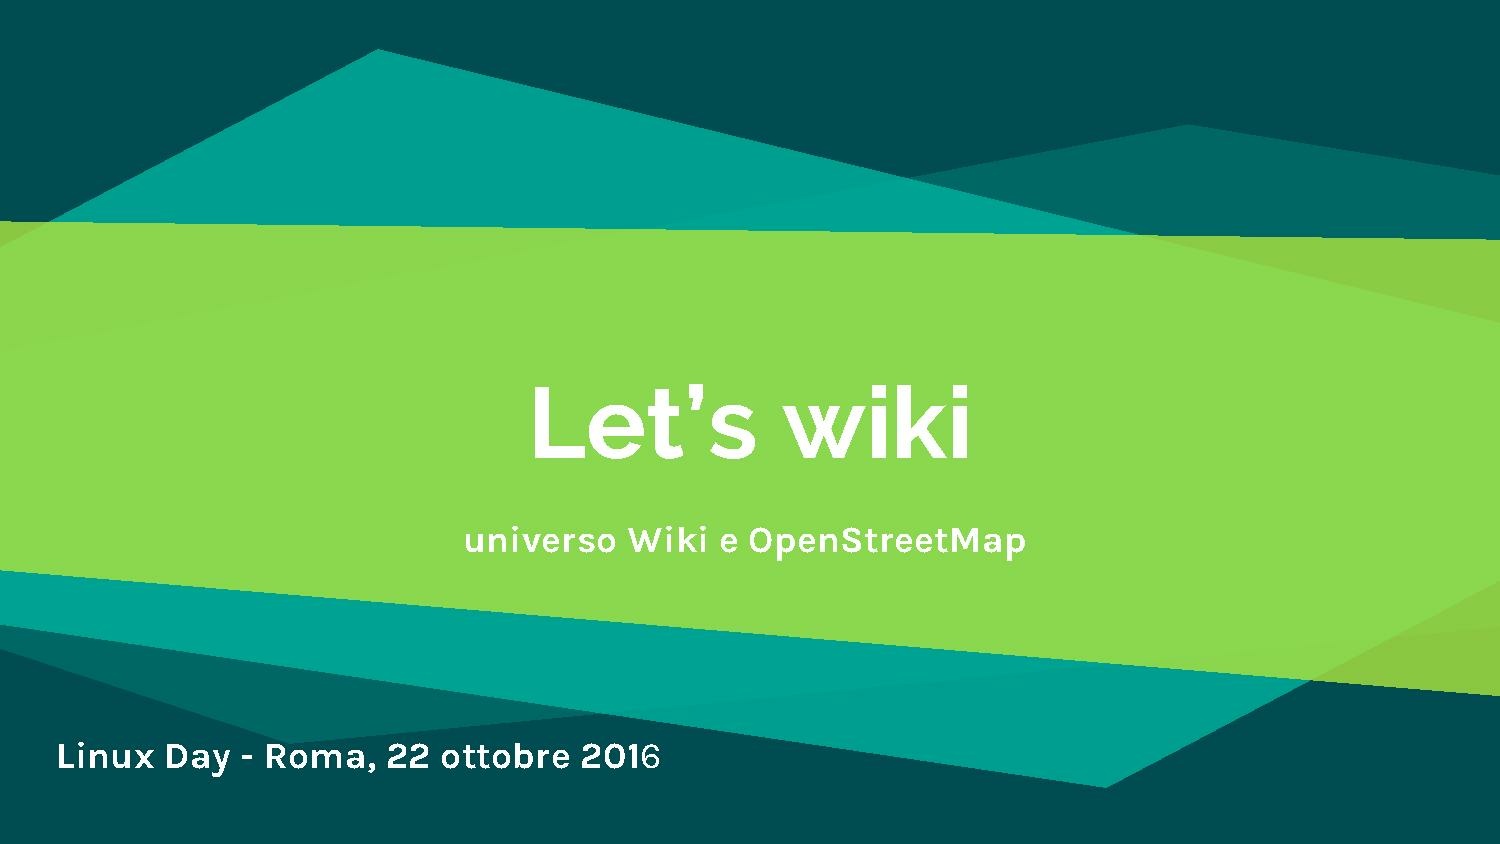 Let's wiki - LinuxDay 2016